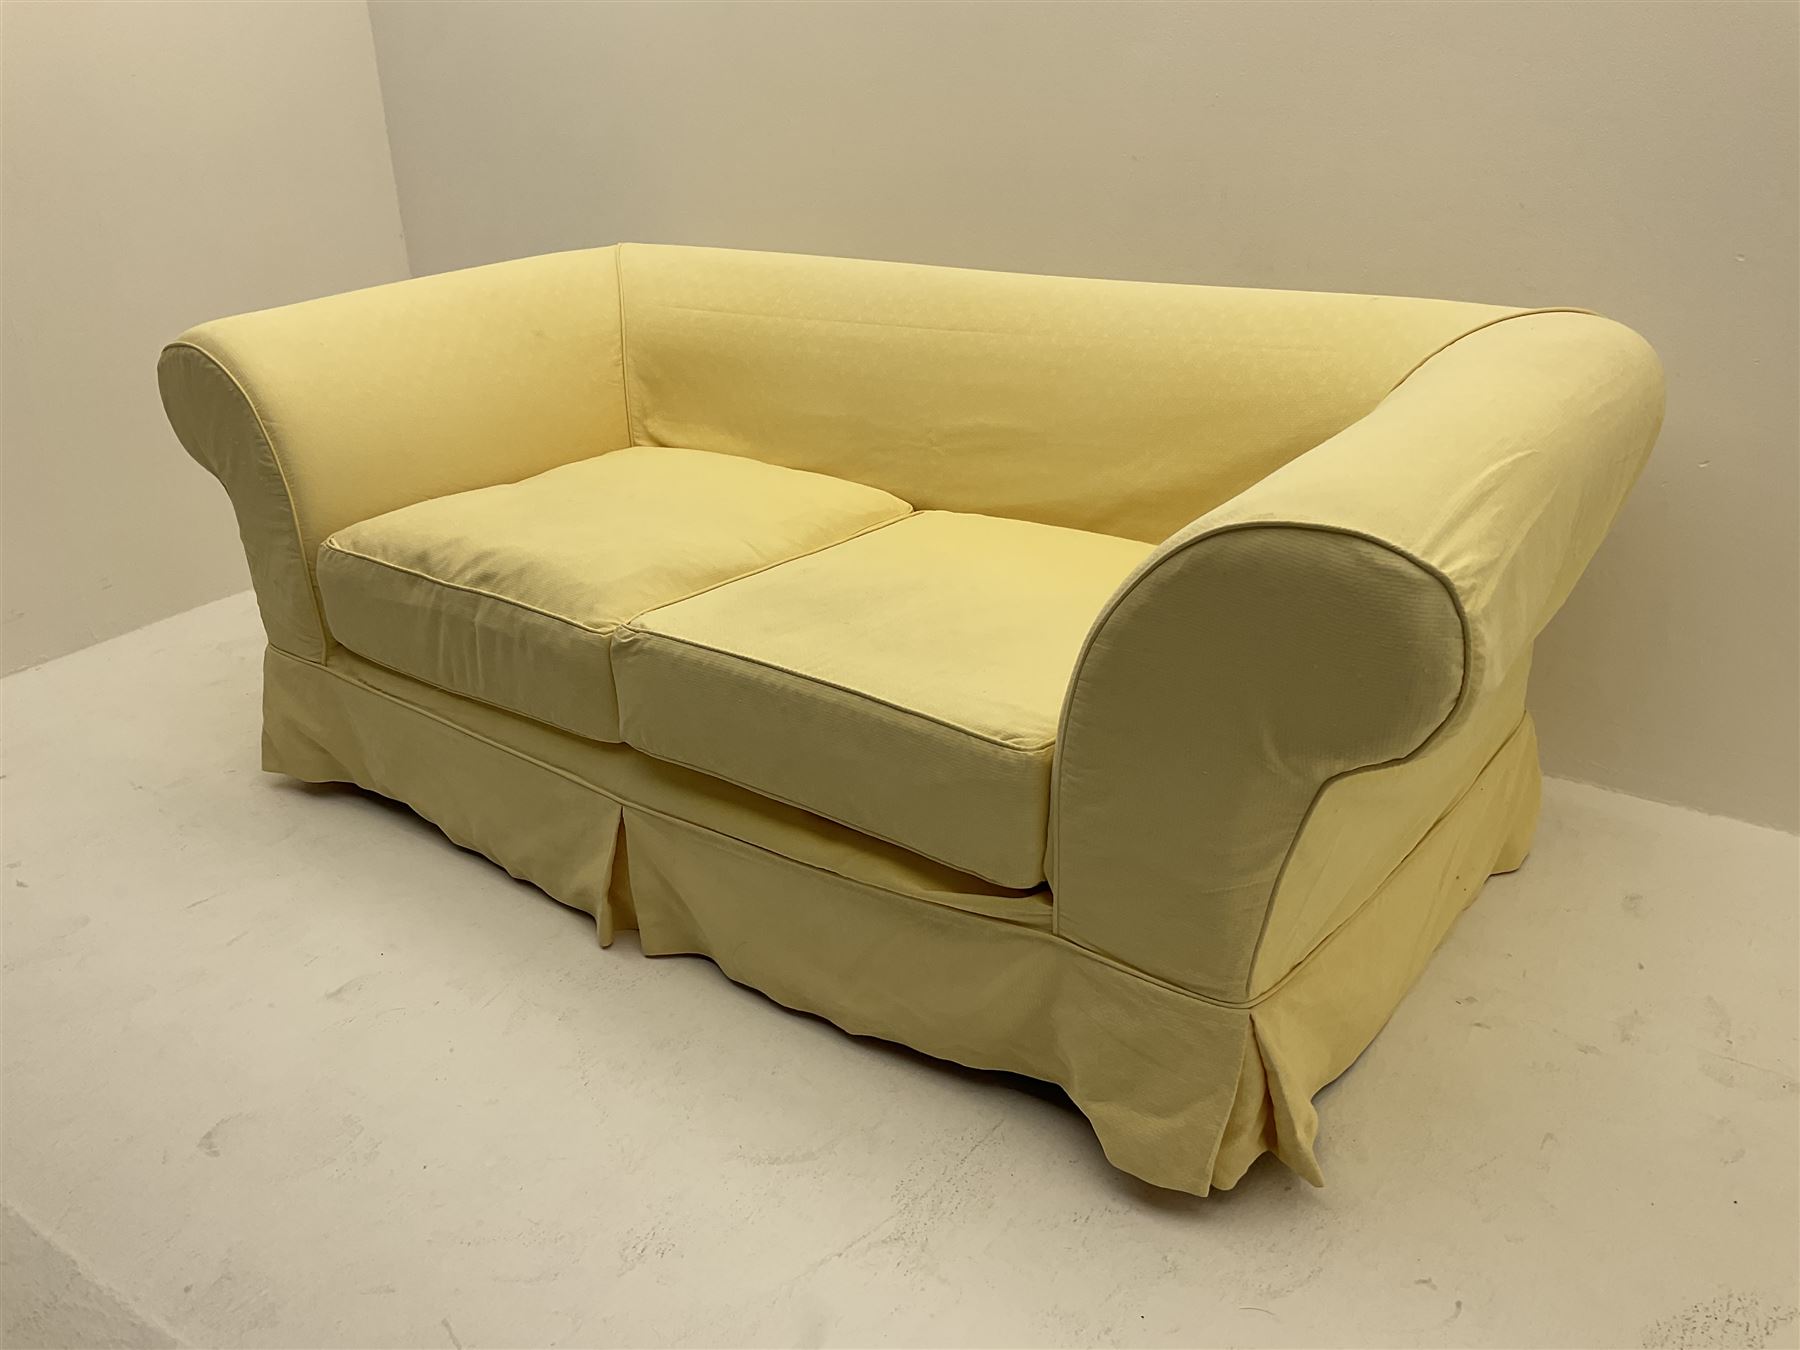 Pair traditional two seat sofas upholstered in pale yellow cover - Image 6 of 6